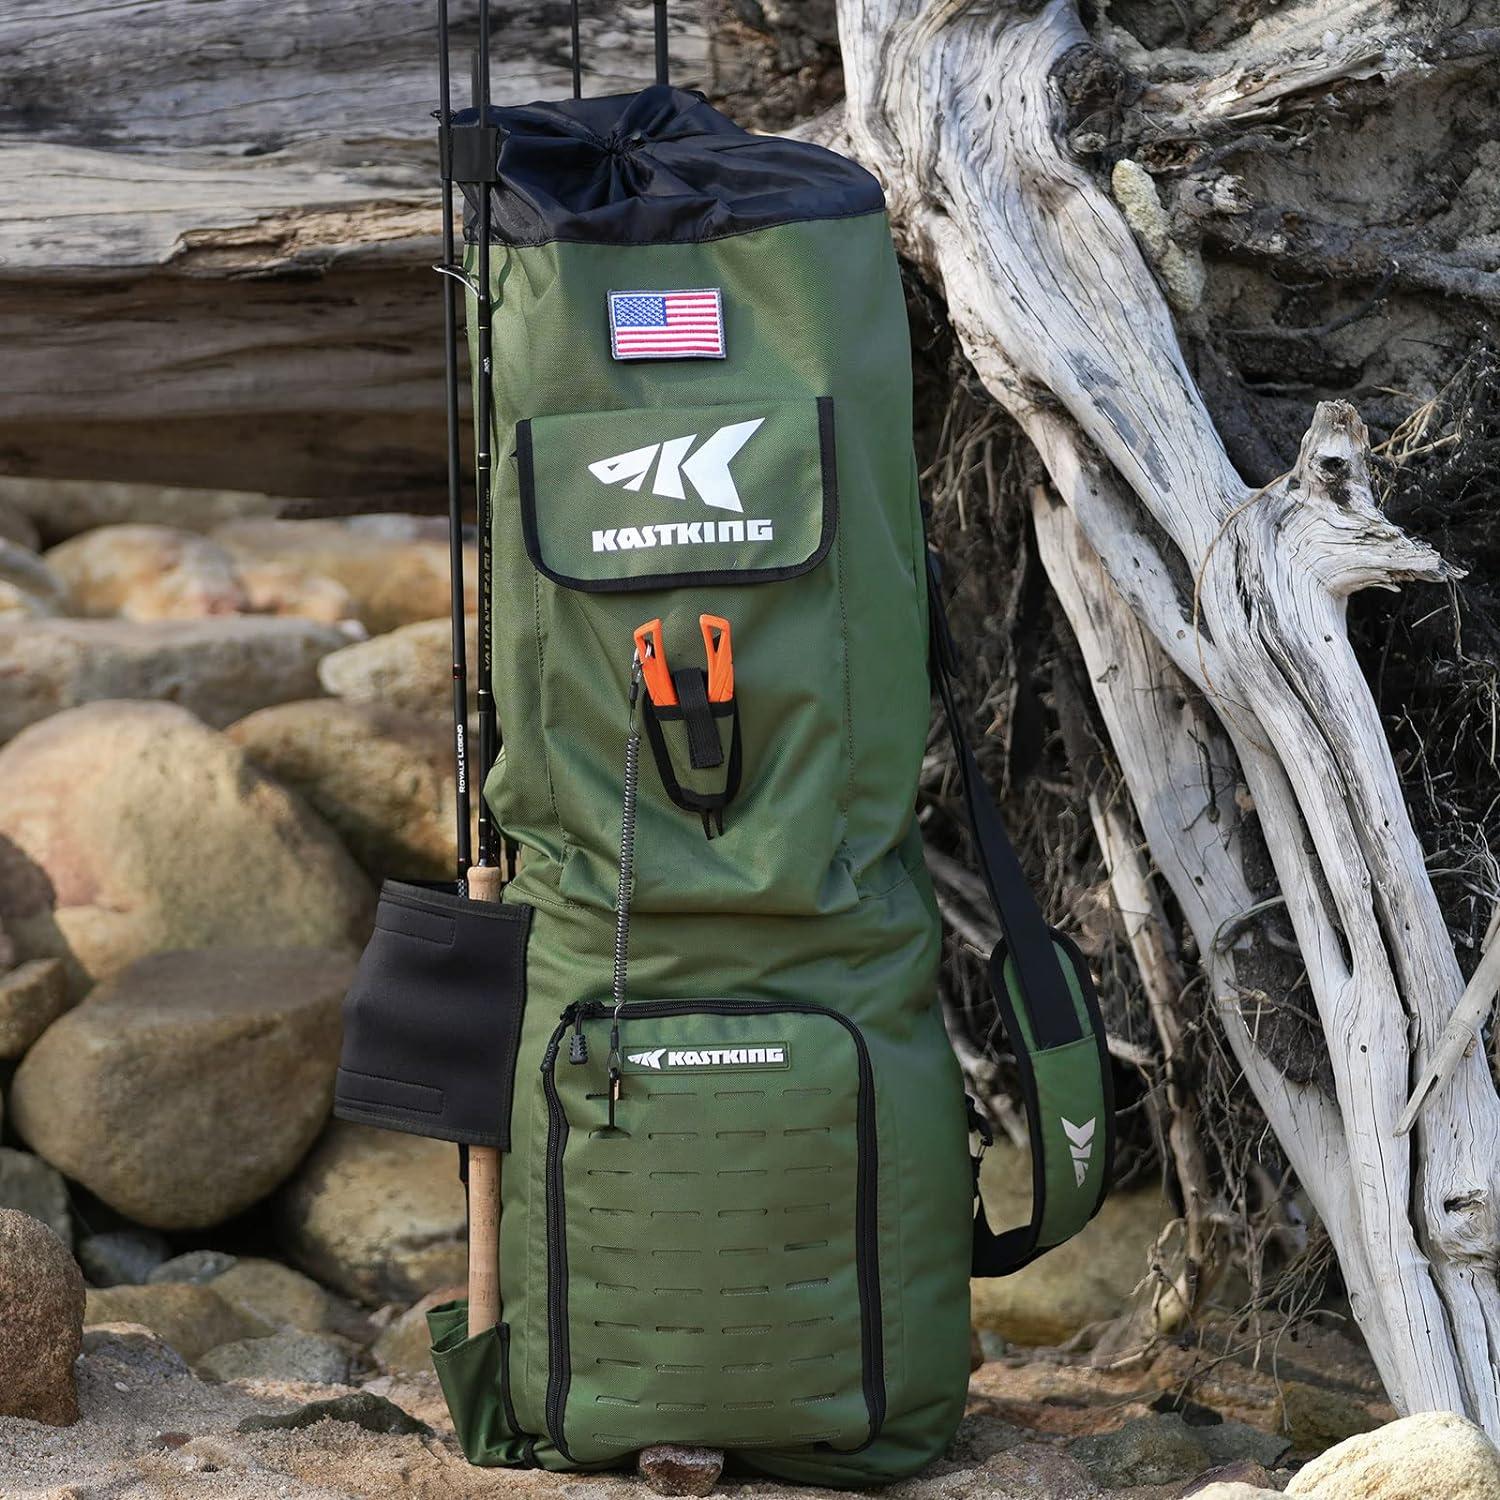 KastKing Karryall Fishing Tackle Backpack with Rod Holders 4 Tackle Boxes